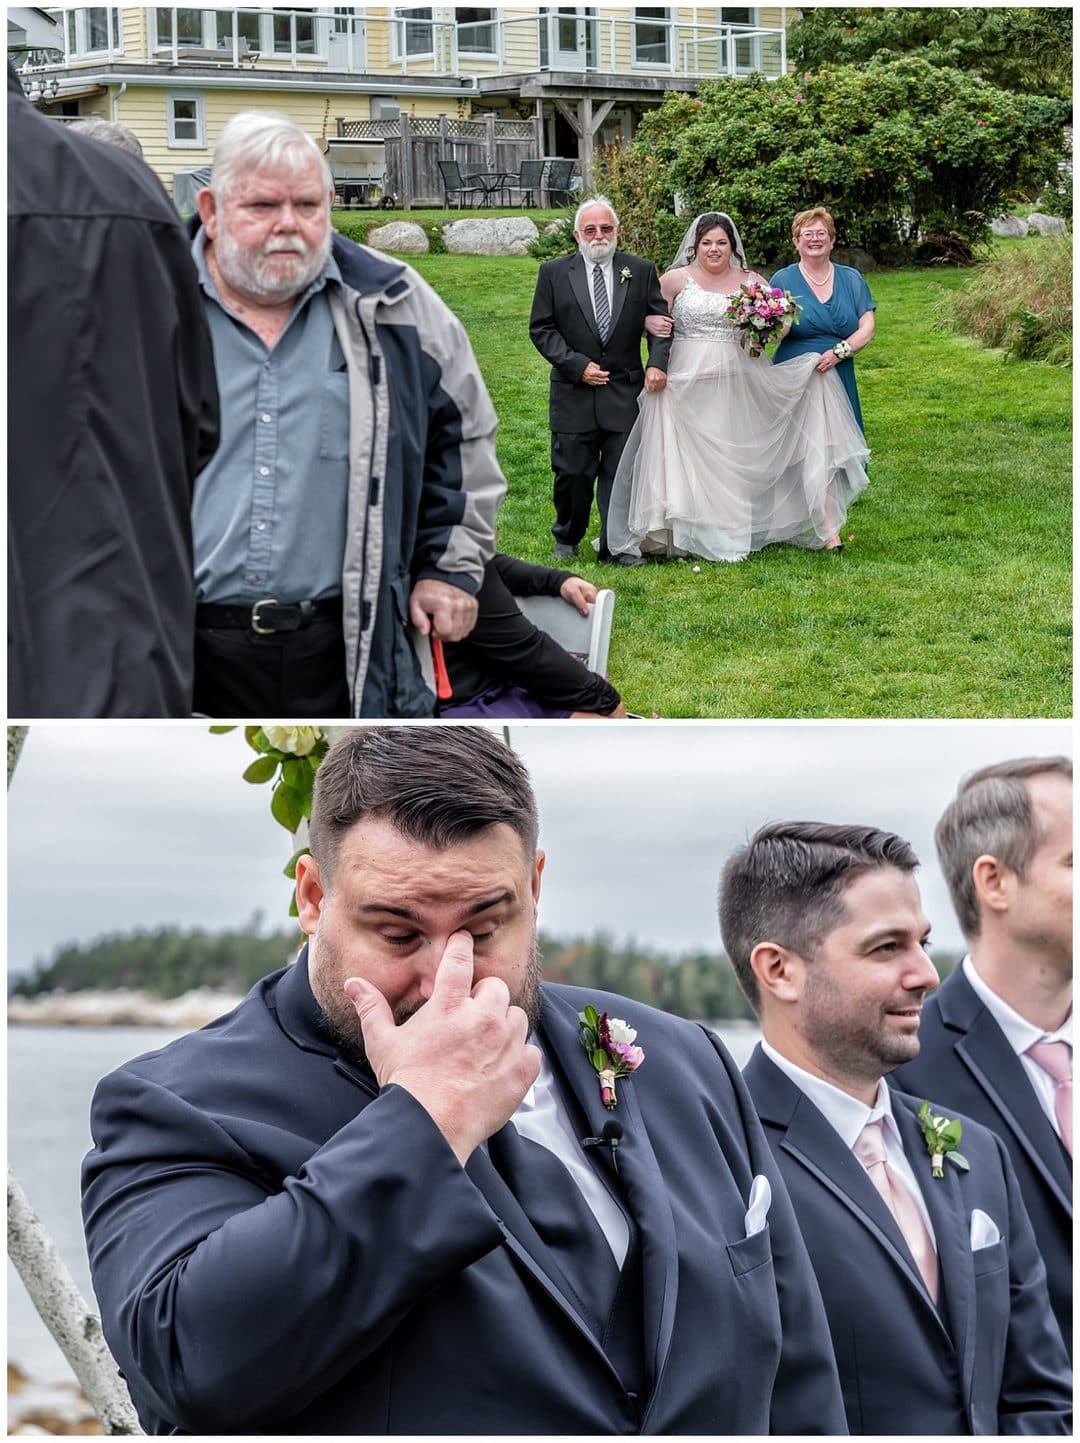 The groom gets emotional as his bride walks up the aisle with her parents during their wedding ceremony at the Oceanstone Resort in NS.